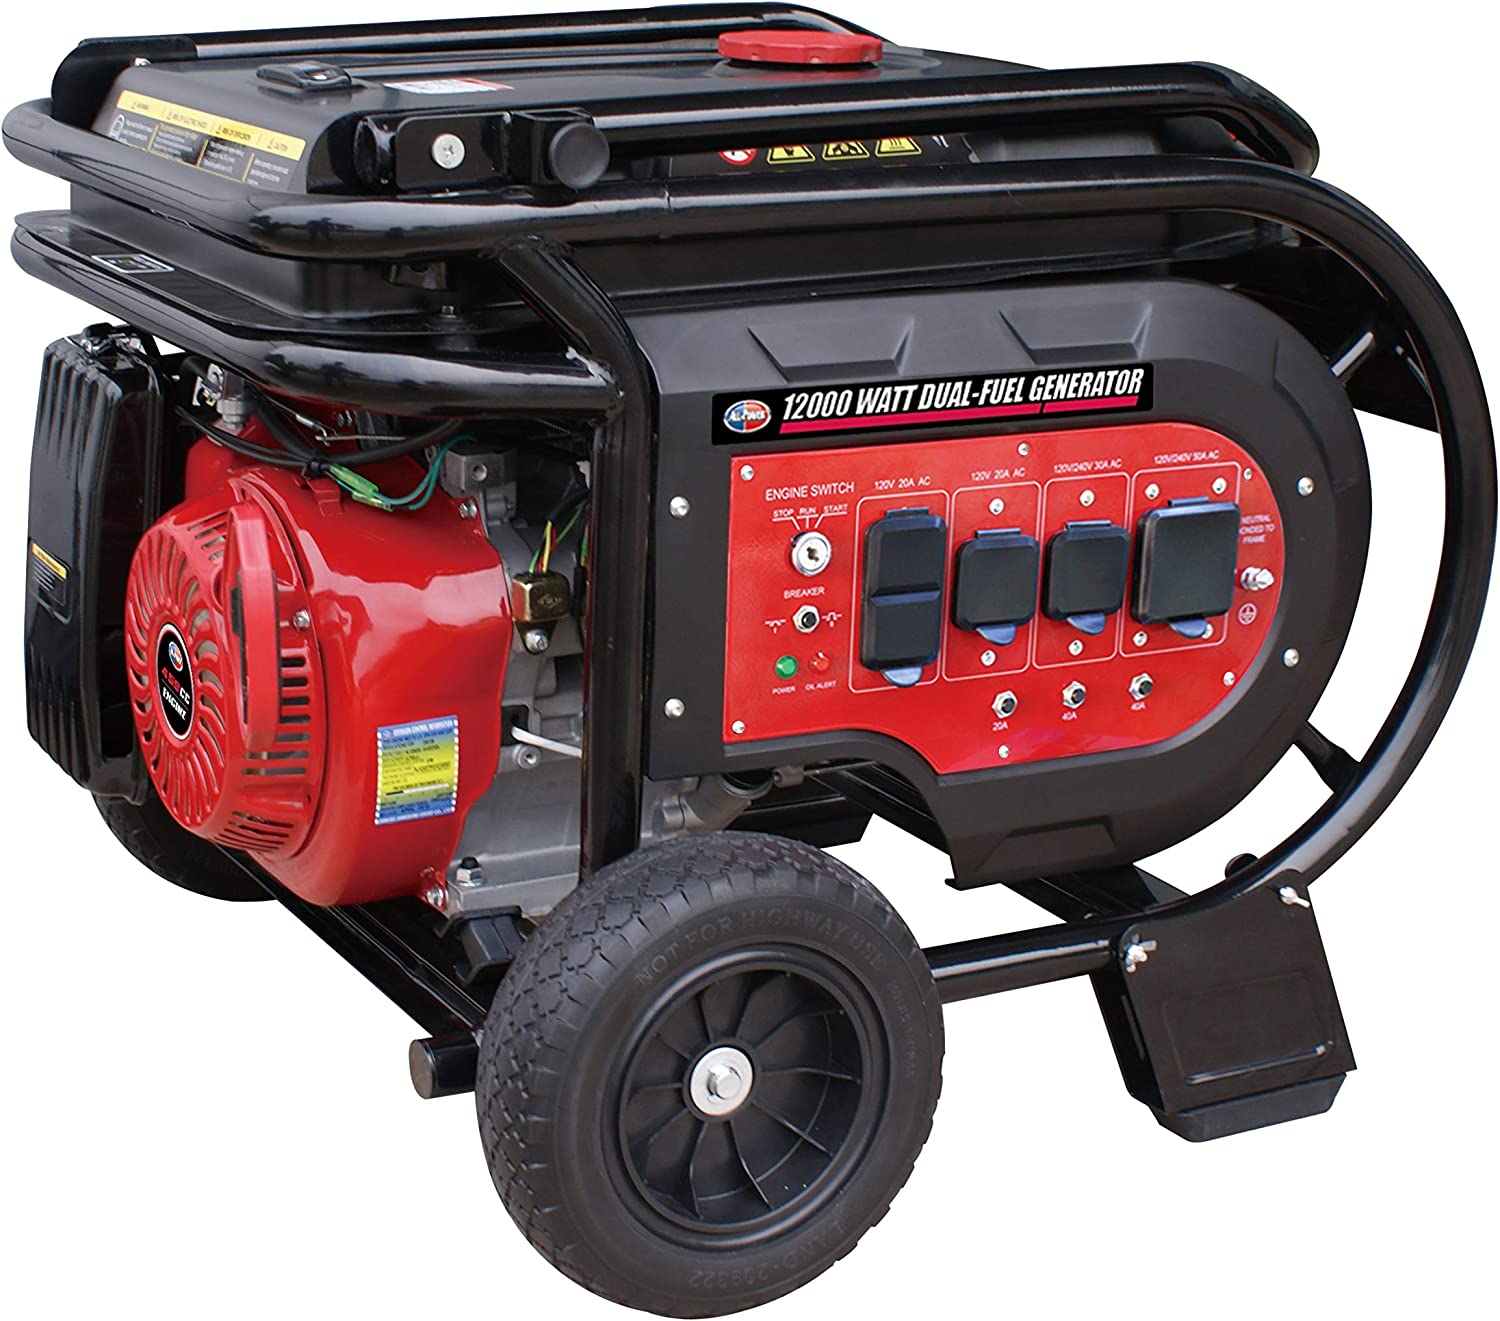 All Power America G12000EGL 12000 Watt Heavy Duty Dual Fuel Portable Generator with Electric Start 12000W Gas/Propane(LPG) with 50A 120/240V AC Outlet, Black/Red